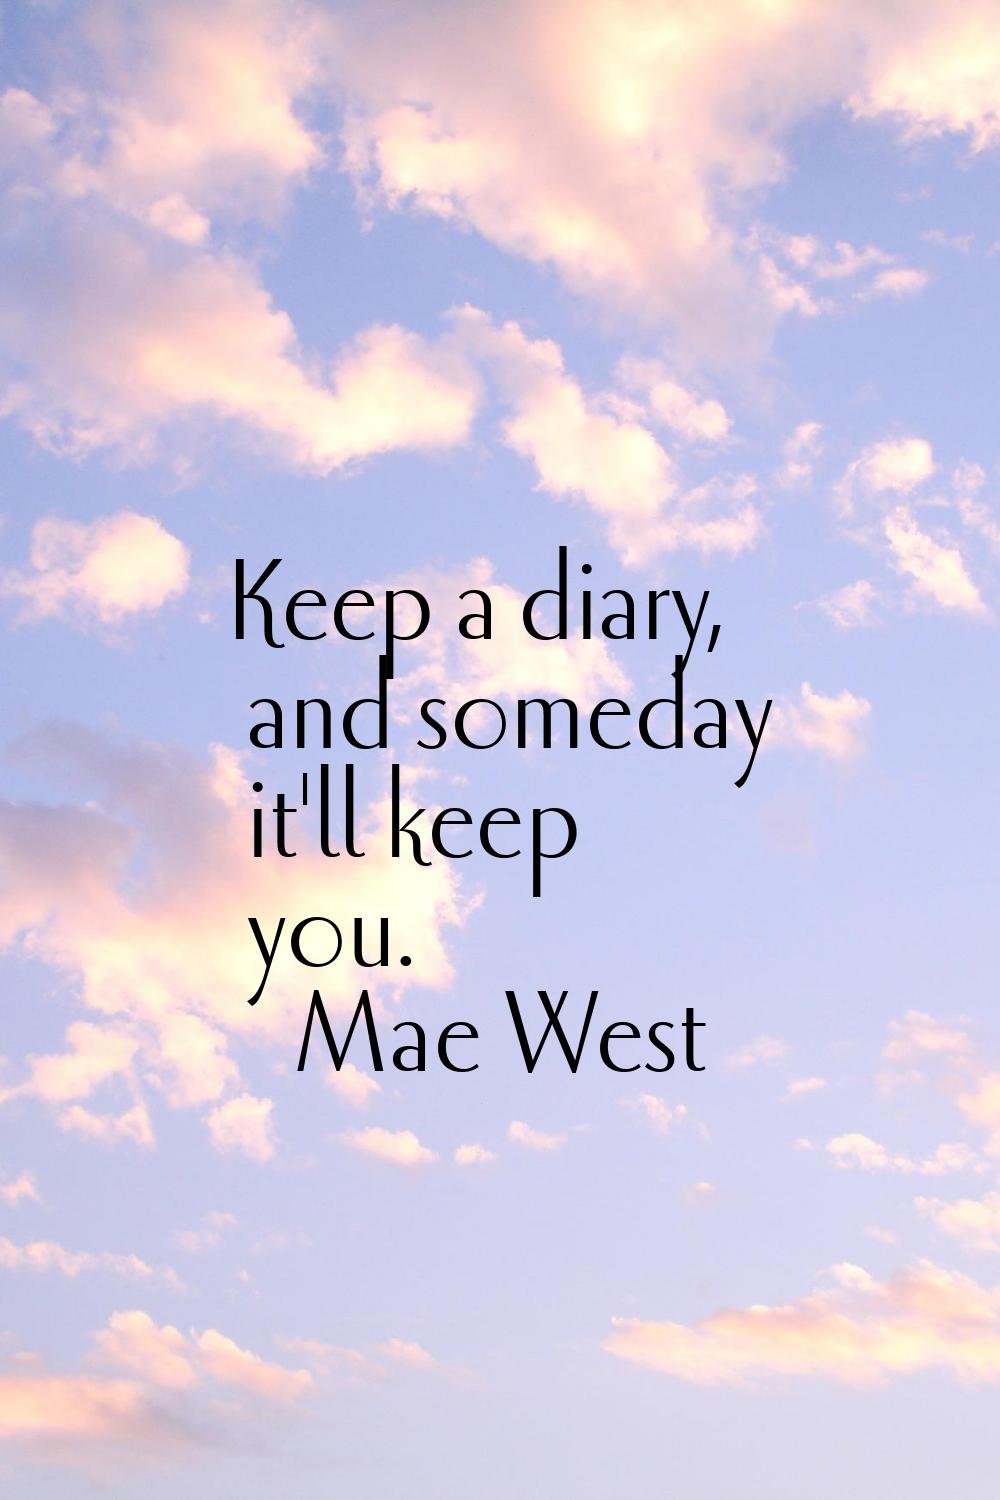 Keep a diary, and someday it'll keep you.